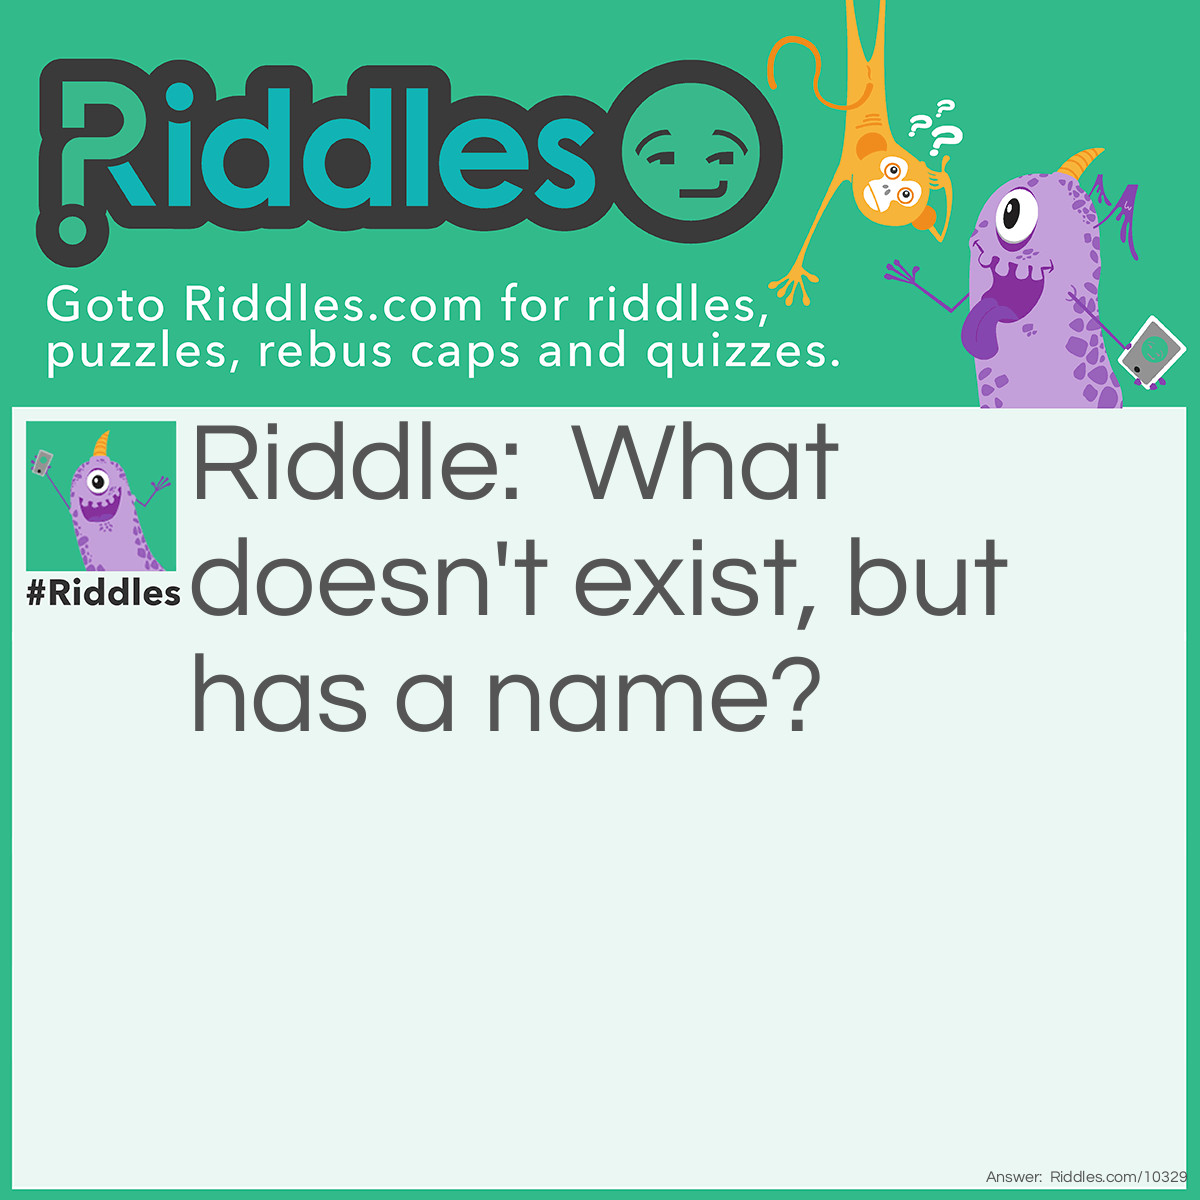 Riddle: What doesn't exist, but has a name? Answer: The word "Nothing".